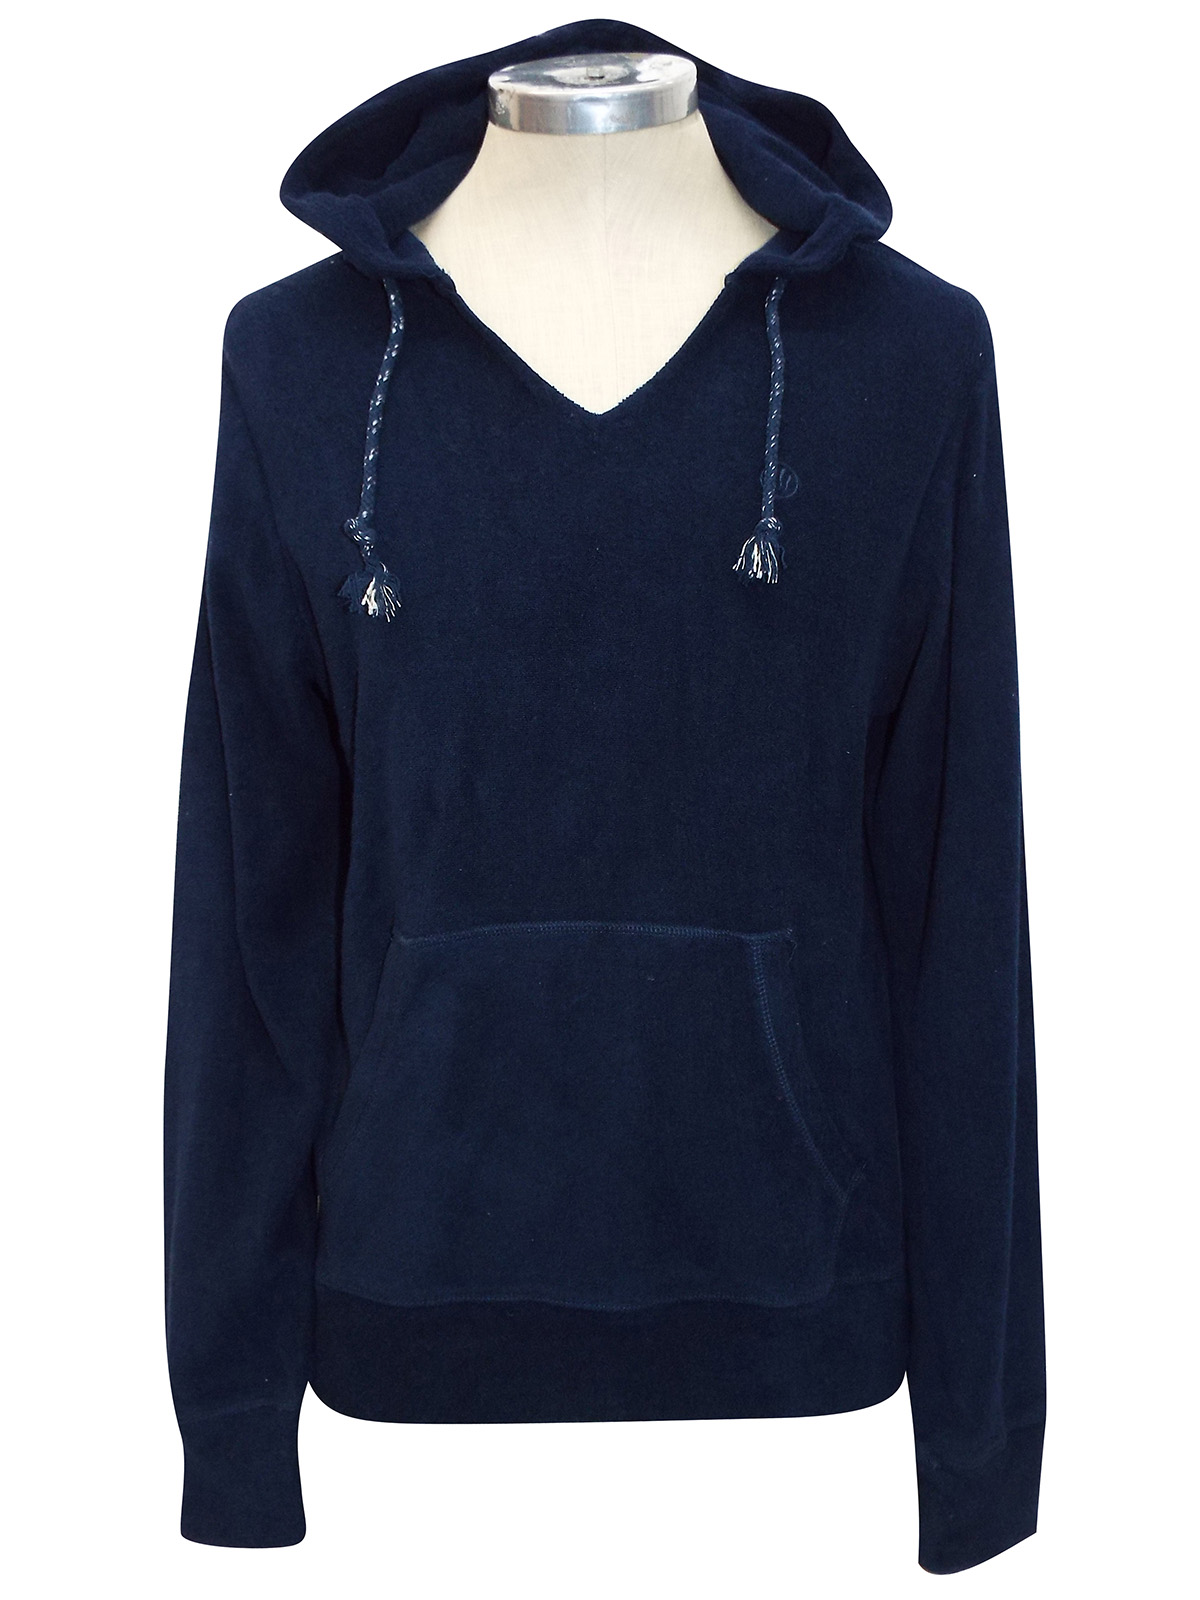 FAT FACE - - FatFace Mens NAVY Overhead Hooded Sweatshirt - Size XS to XL